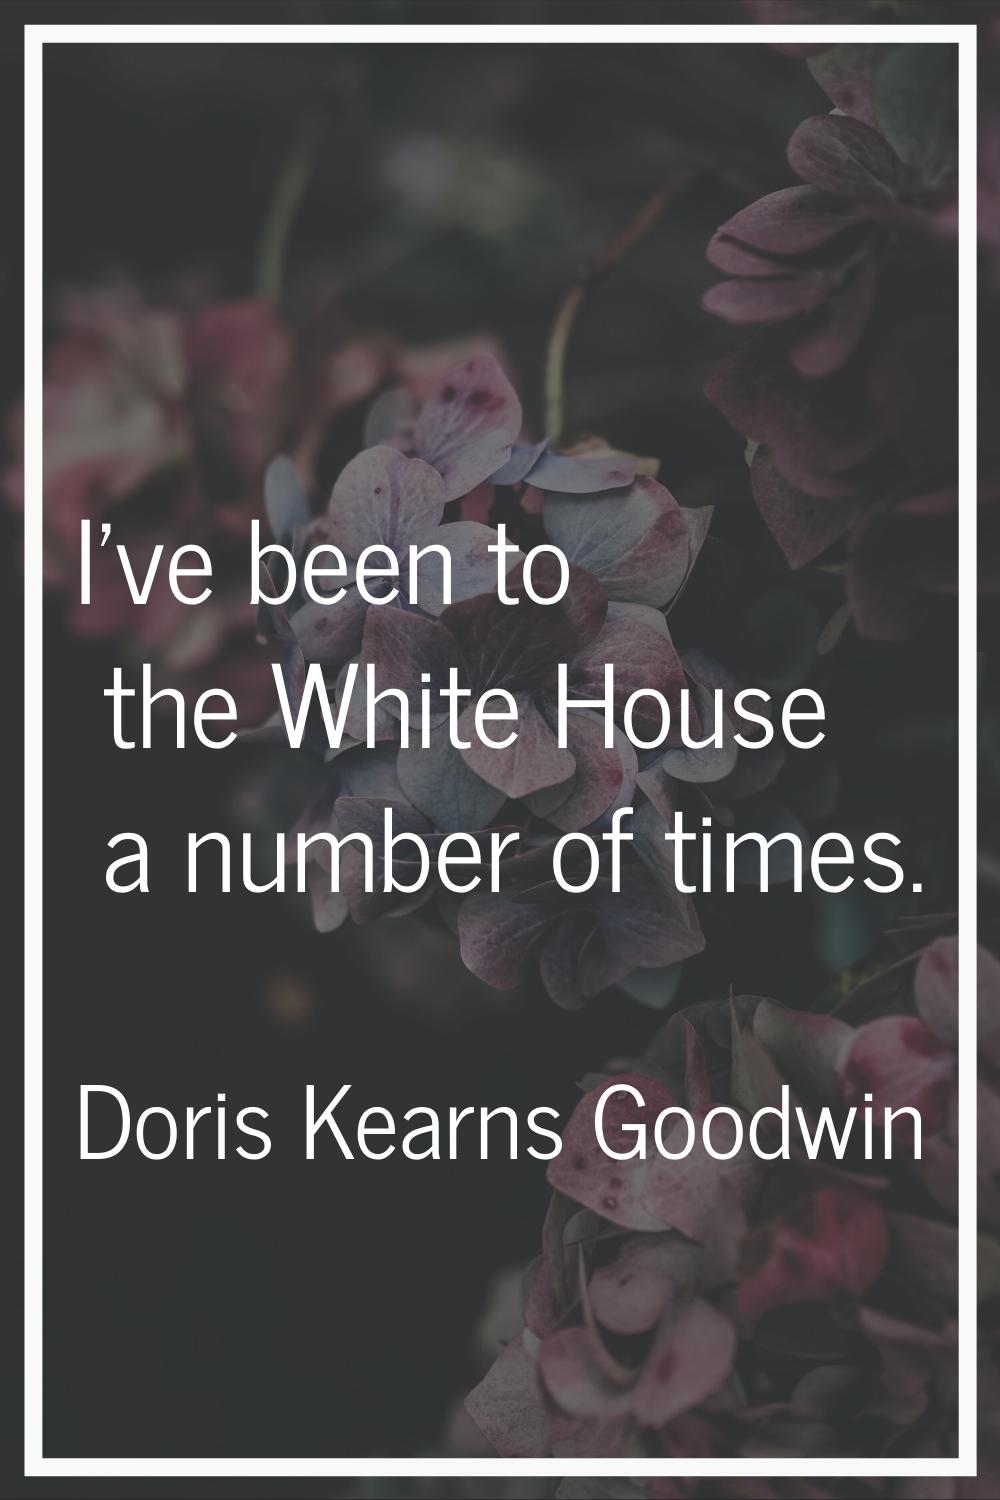 I've been to the White House a number of times.